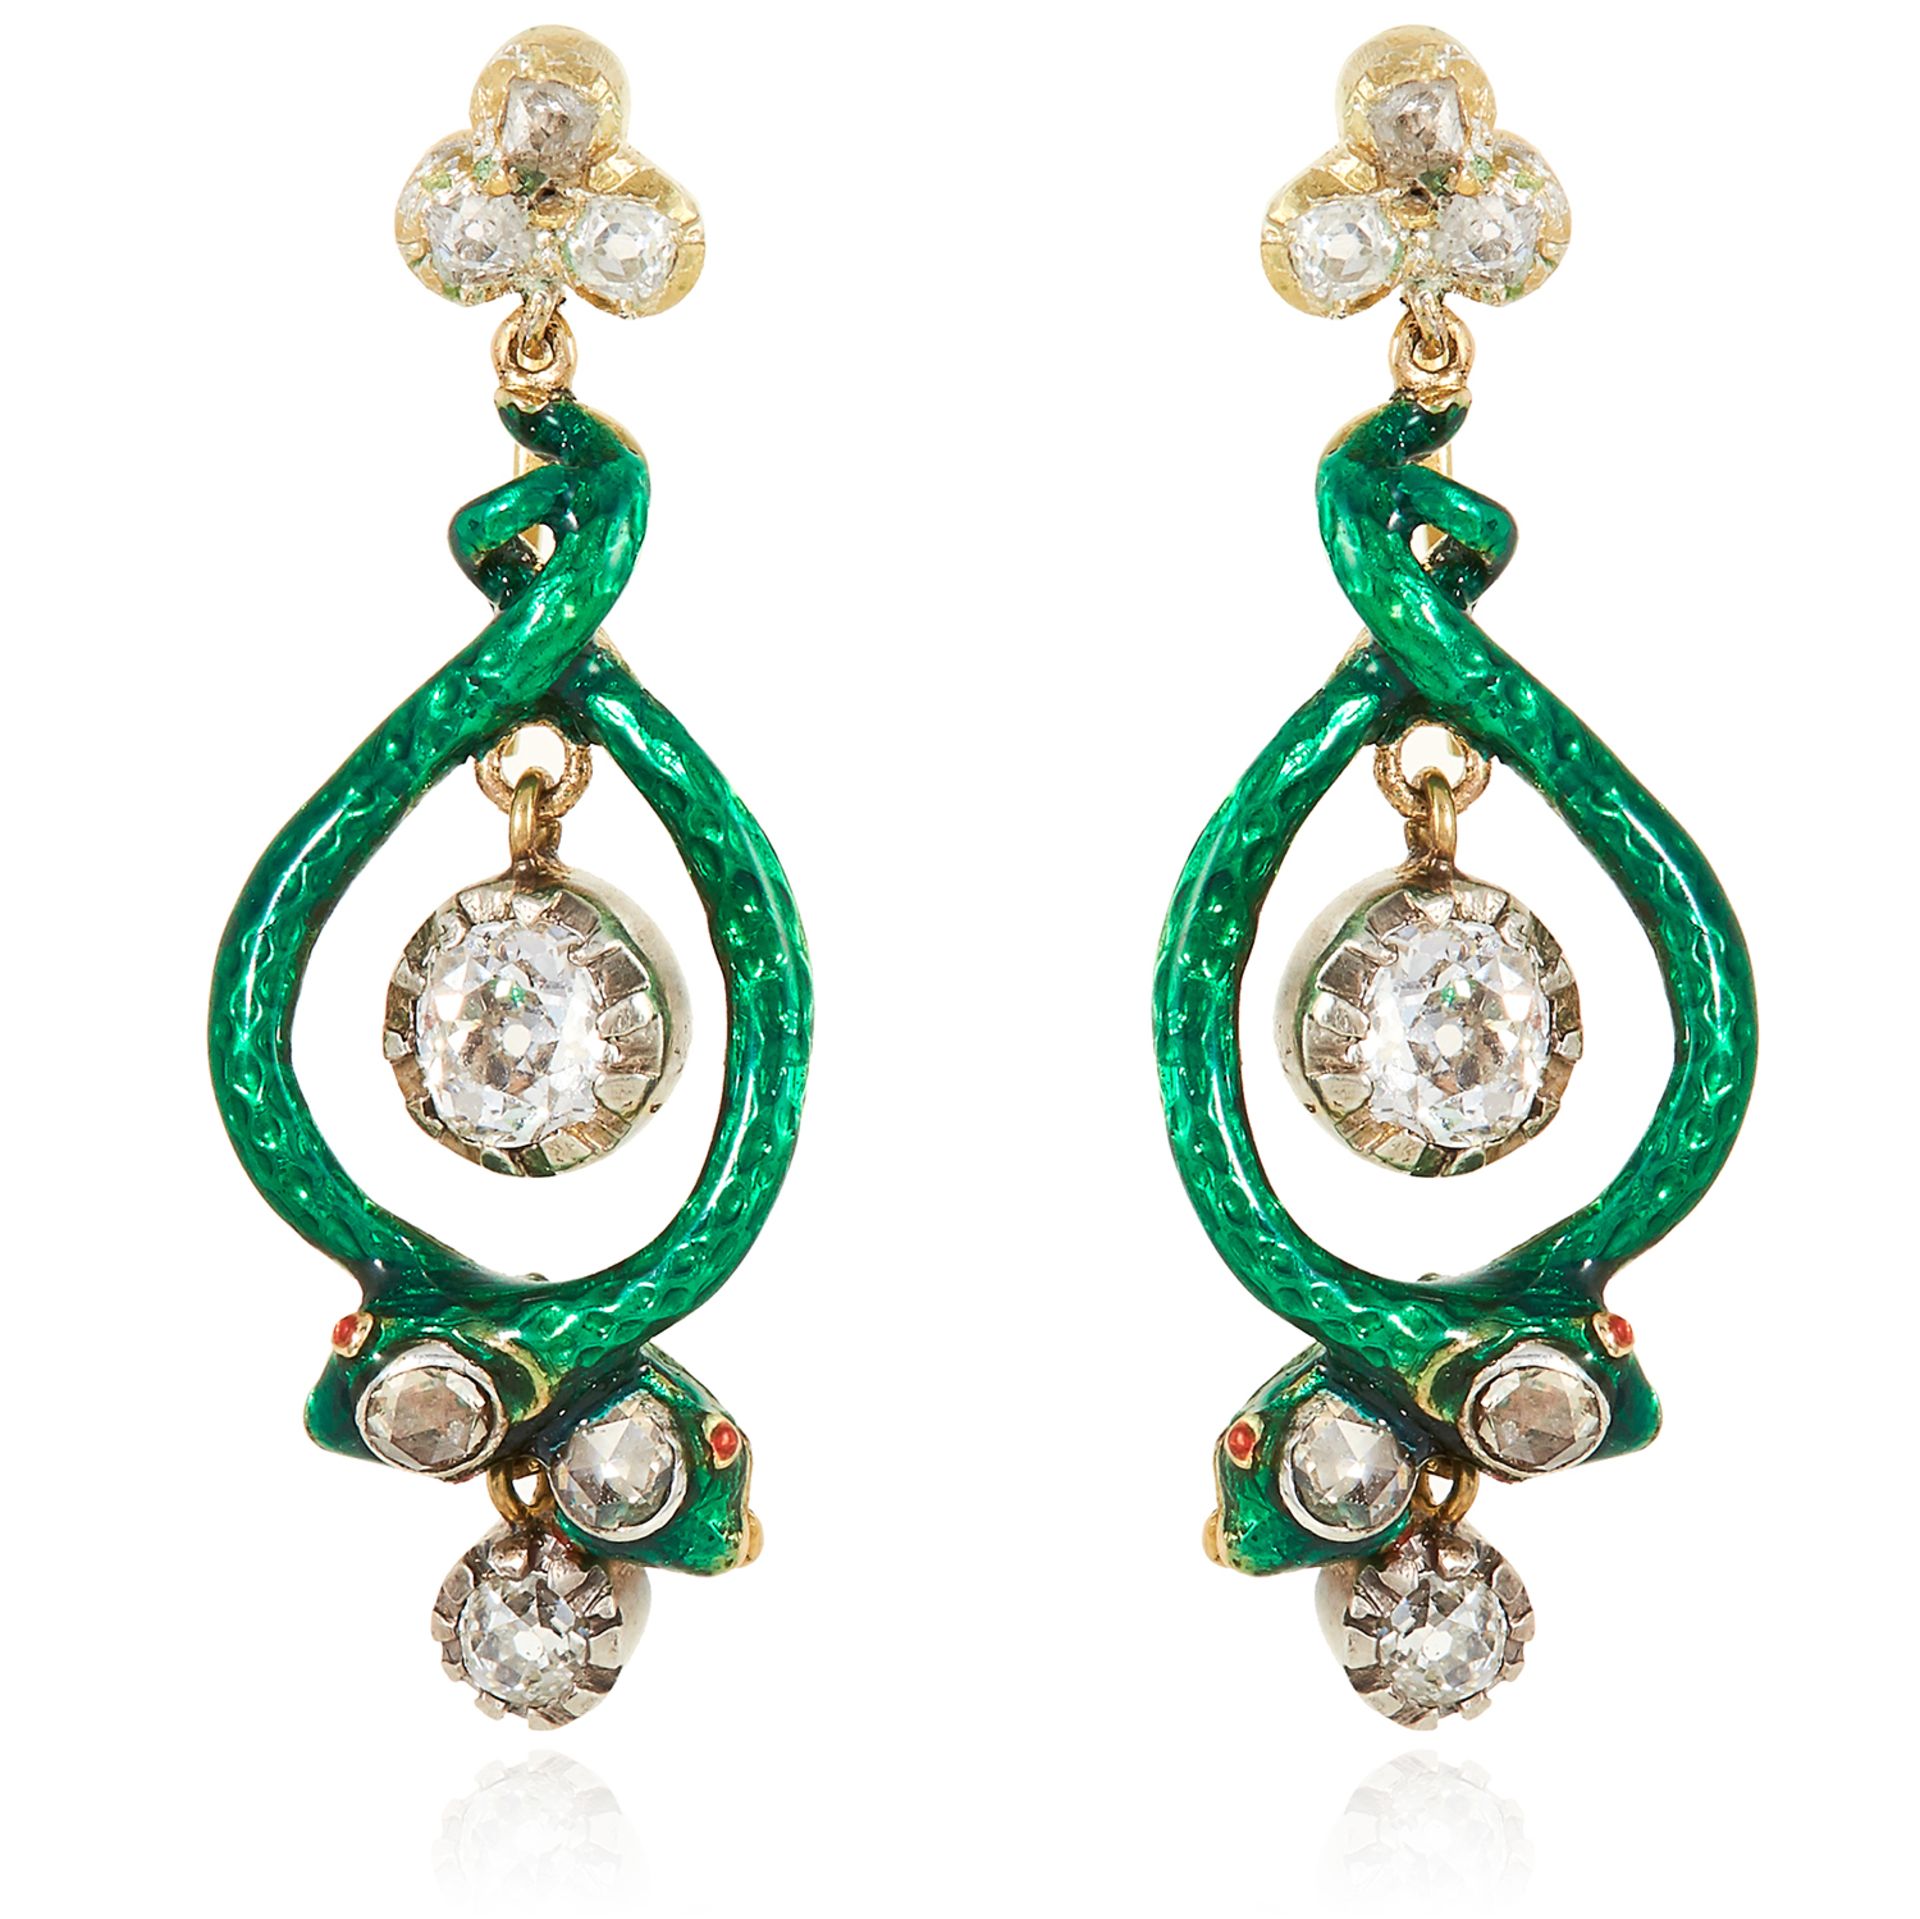 A PAIR OF ANTIQUE DIAMOND AND ENAMEL SNAKE EARRINGS in high carat yellow gold and silver, each